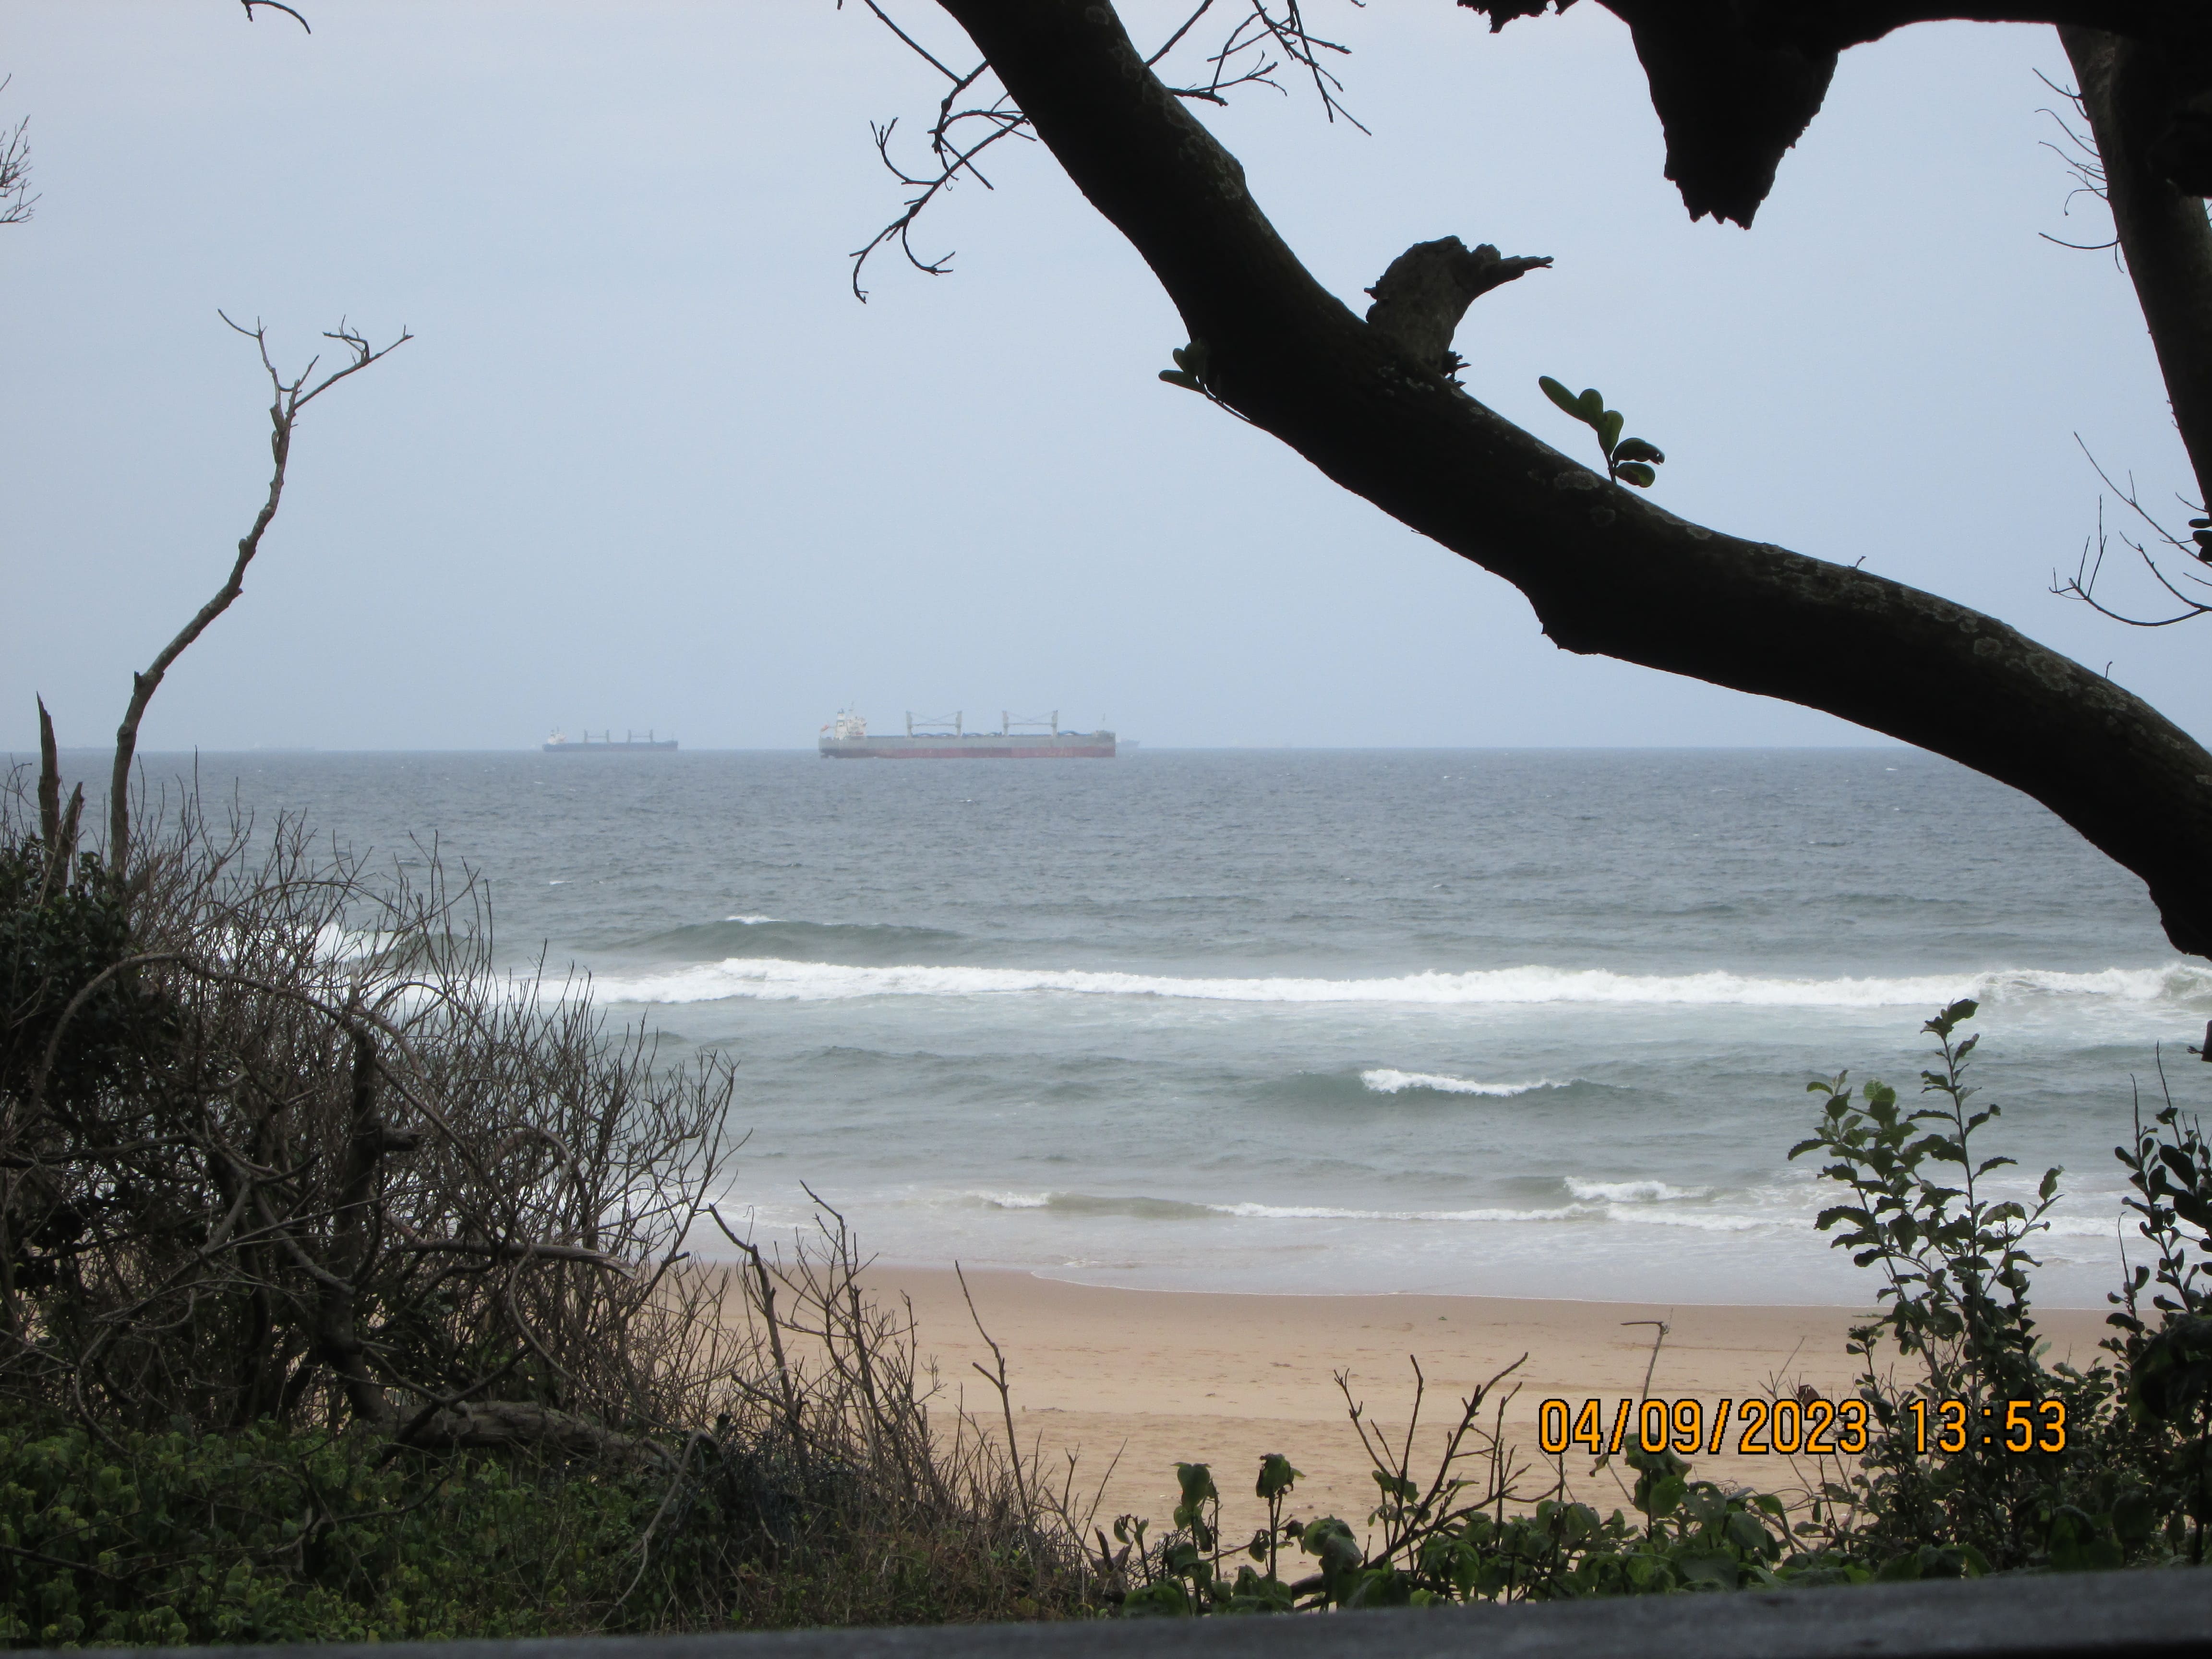 A landscape image of a beach, there is foliage and a tree branch peaking around the edges. On the ocean there is a ship.